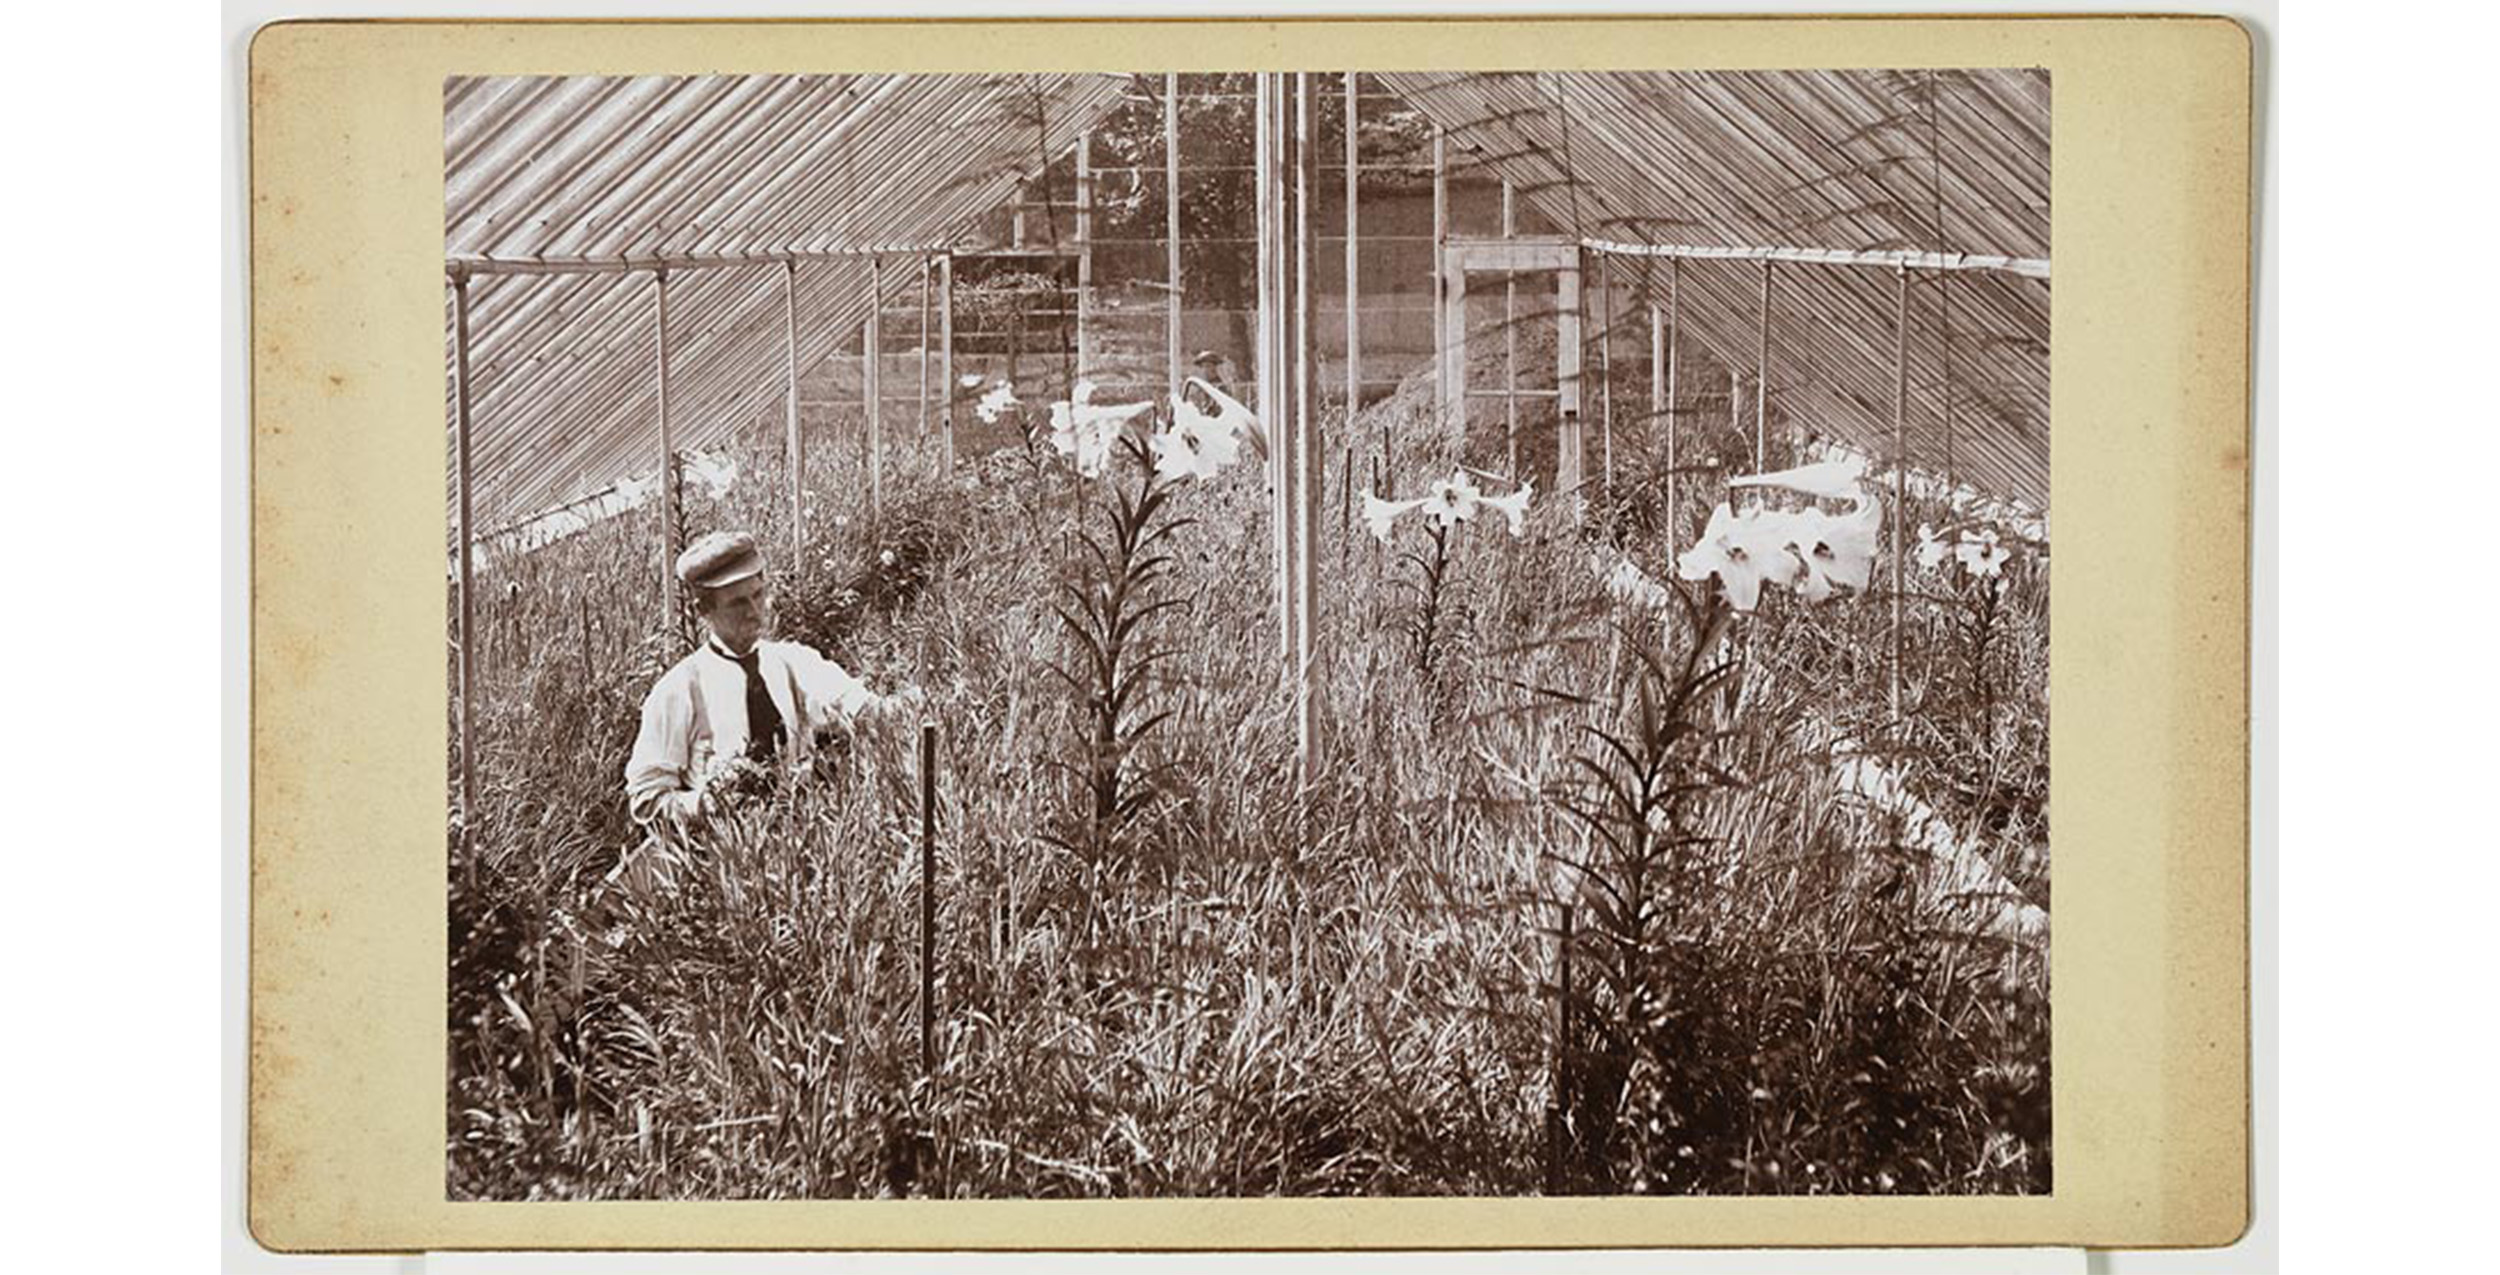 interior, glass green house with tall lilies, man with cap, white shirt, suspenders and mustache tending to plants